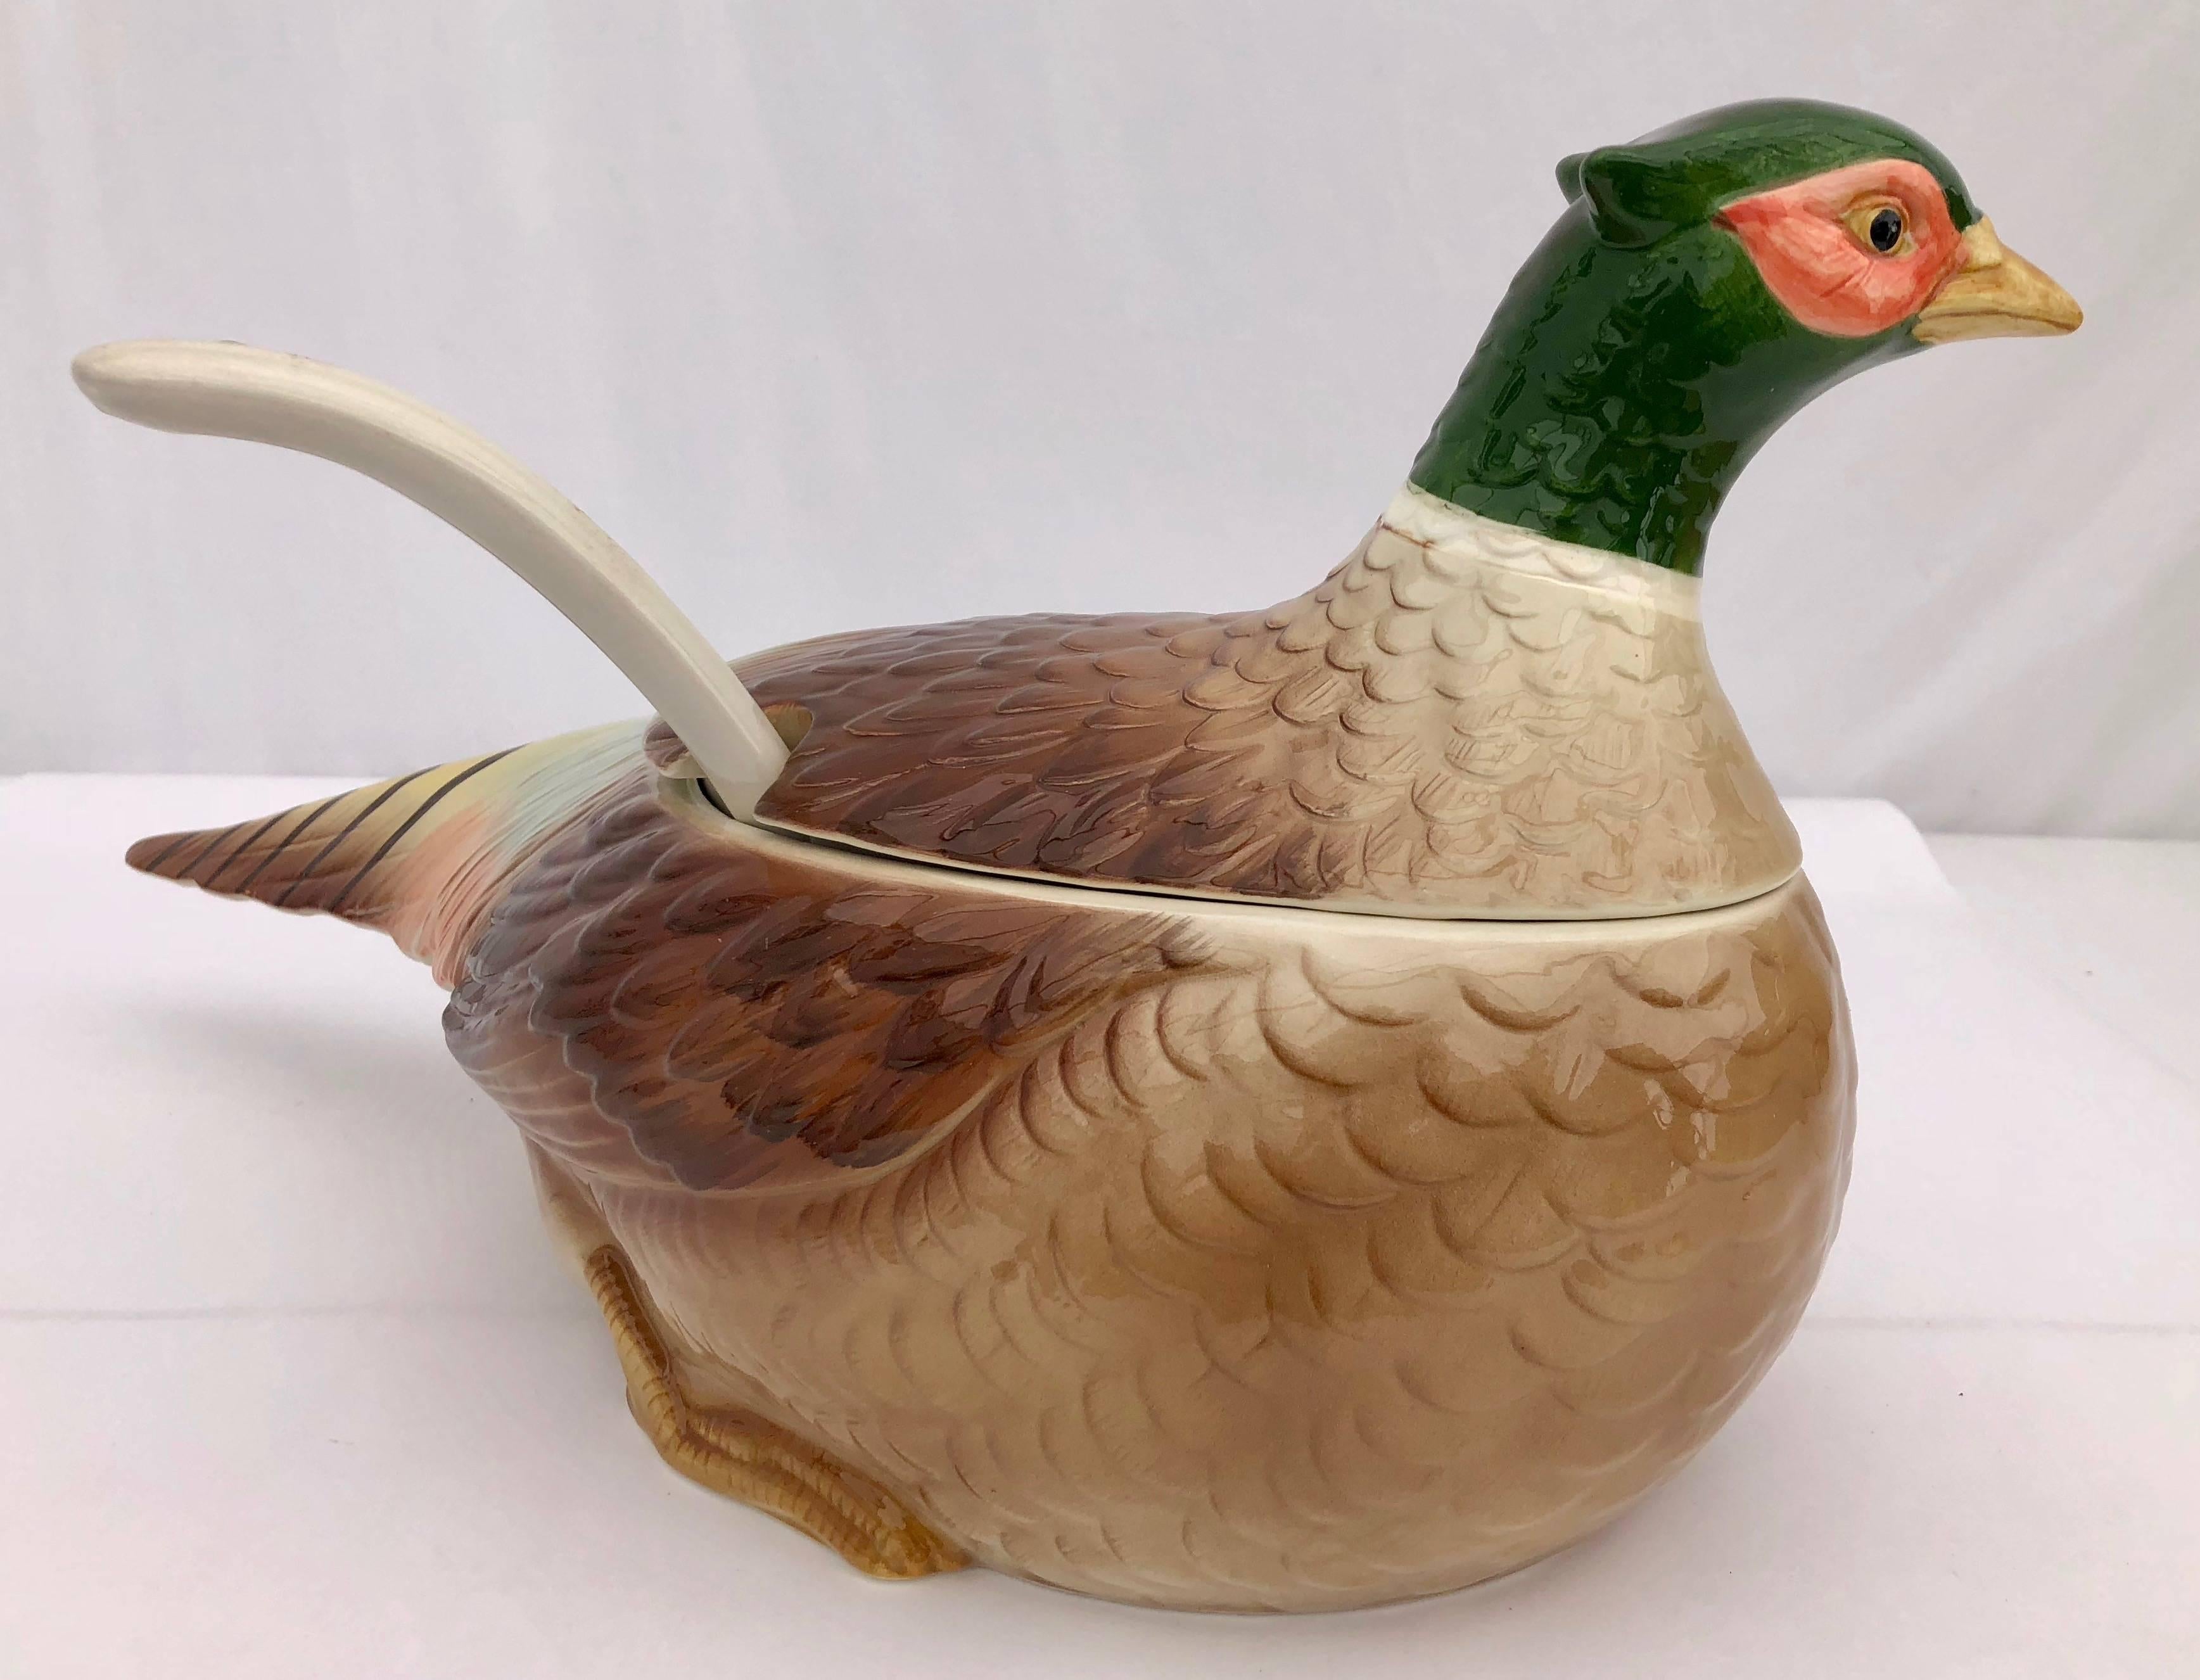 This is a handcrafted ceramic pheasant soup tureen with its ceramic serving spoon, by Otagiri, Japan. It was purchased for a French restaurant, but never used. It comes in its original box. The hand painted colors are vibrant. This would add a